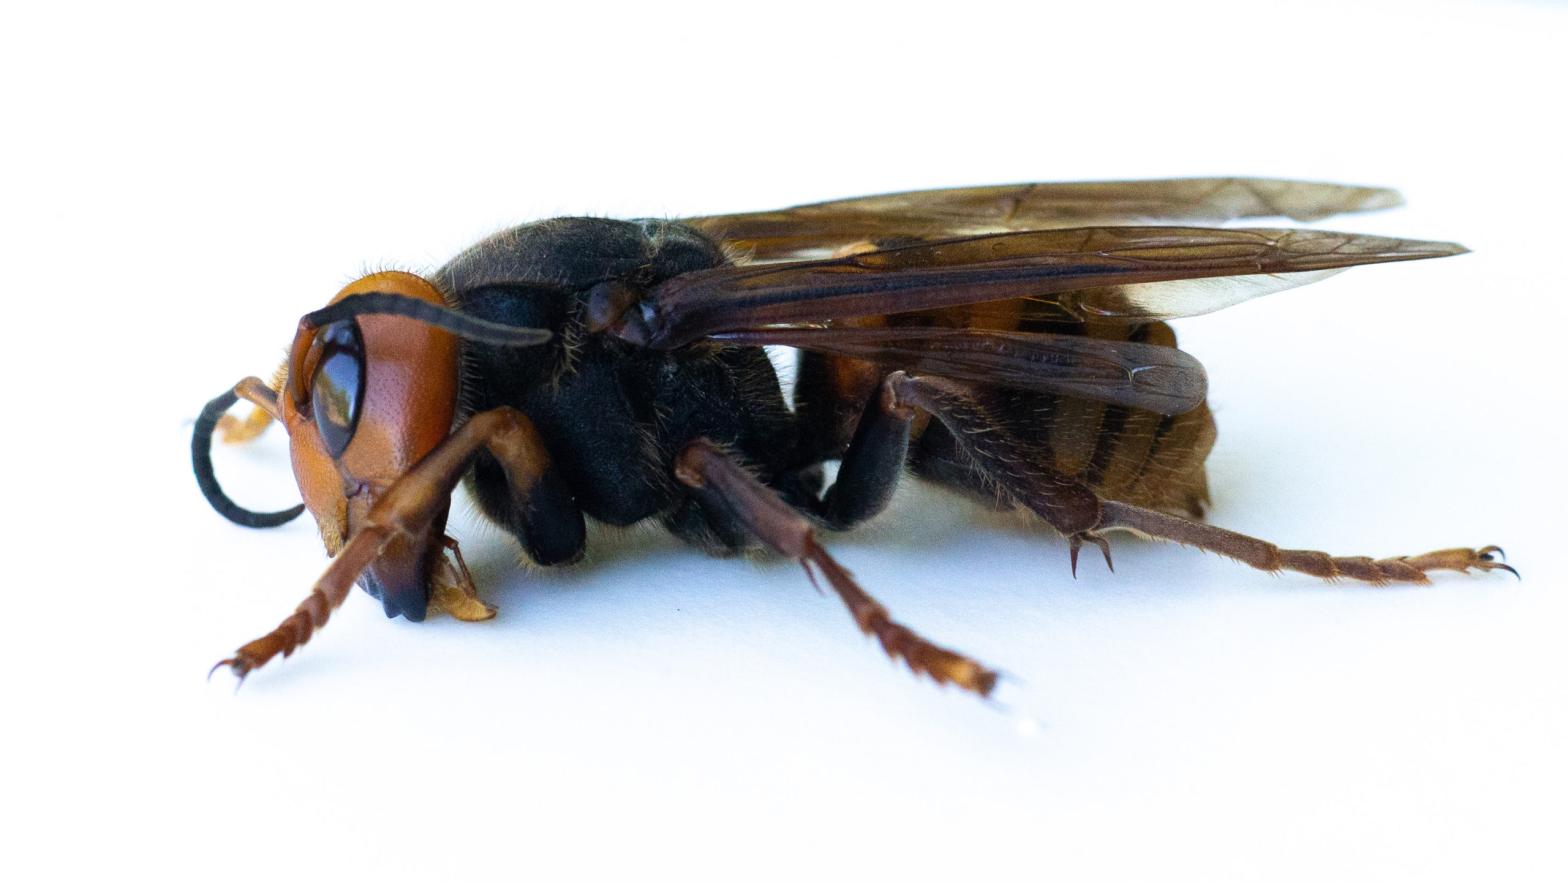 A dead specimen of Vespa mandarinia, aka the Asian Giant Hornet, aka the Murder Hornet, collected by entomologists from the Washington State Department of Agriculture this past July.  (Image: Karen Ducey, Getty Images)